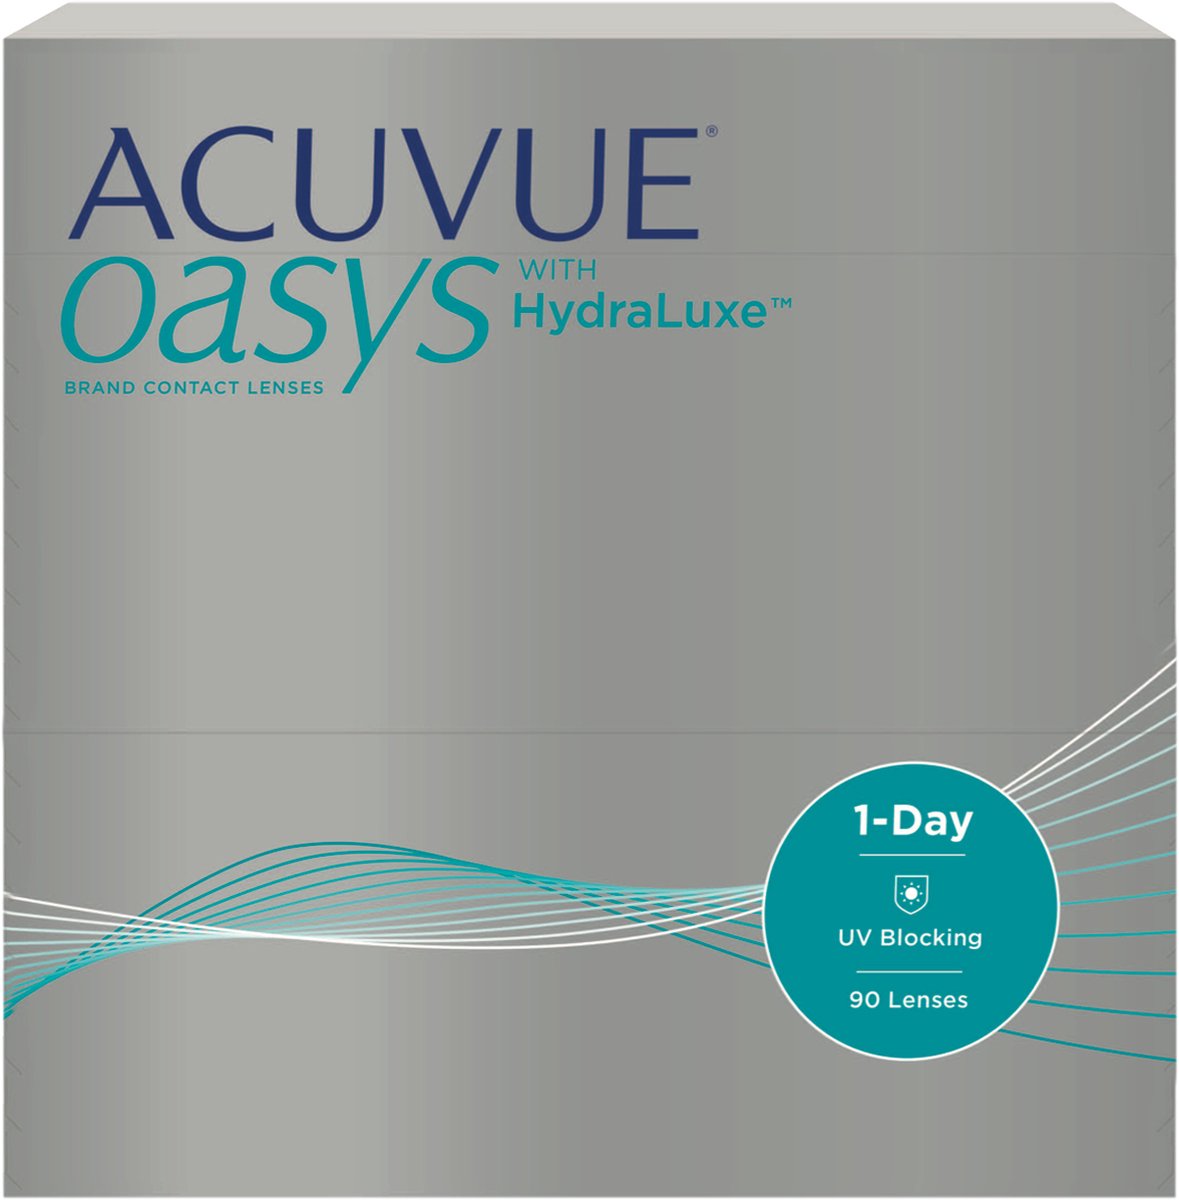 +3.75 - ACUVUE® OASYS 1-Day WITH HYDRALUXE - 90 pack - Daglenzen - BC 9.00 - Contactlenzen